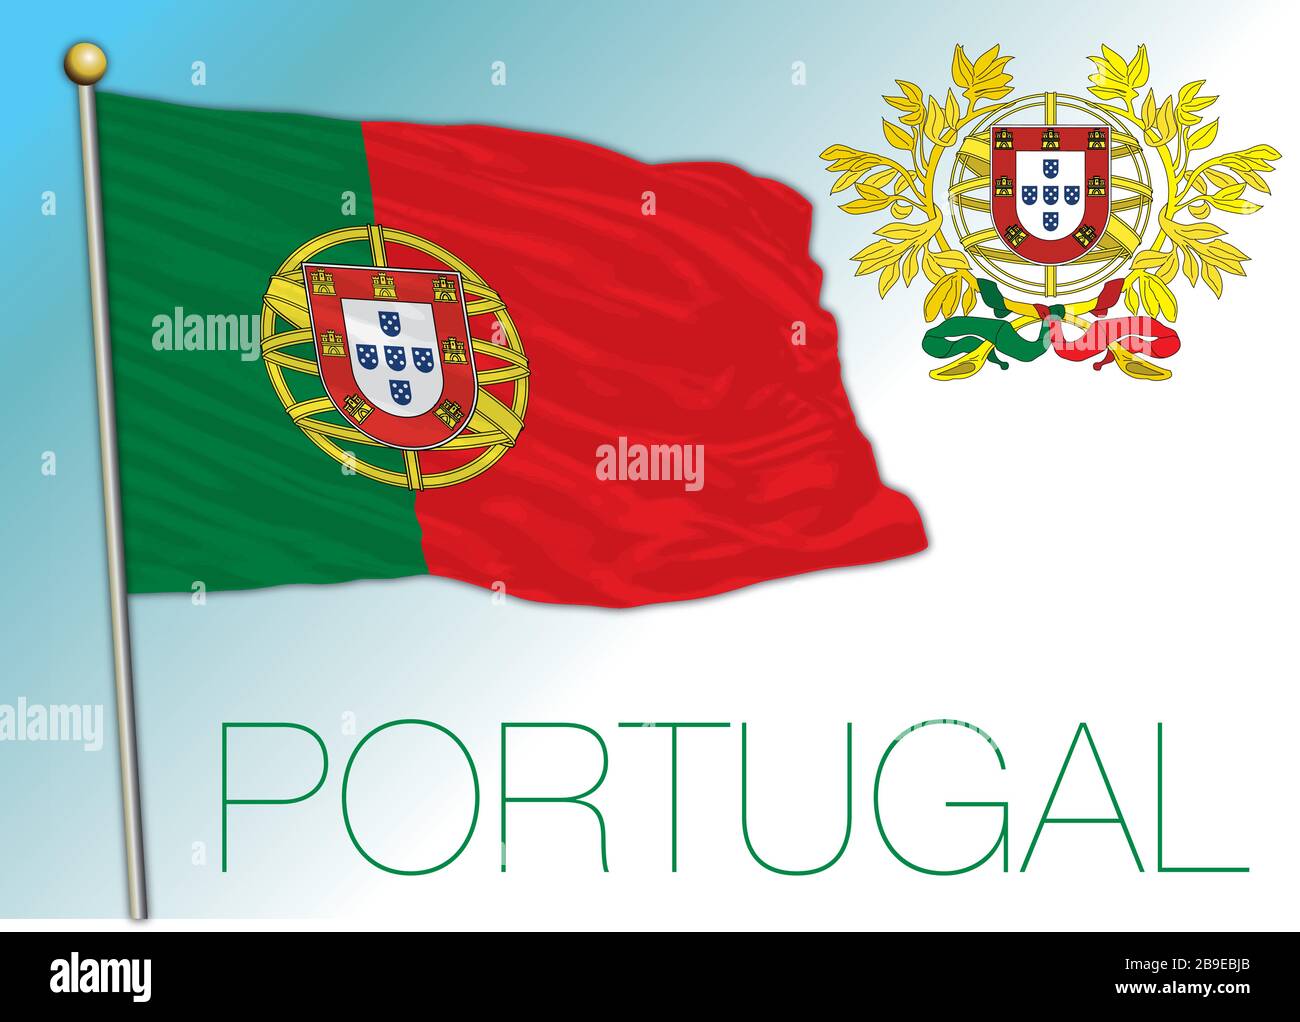 Portugal official national flag and coat of arms, European Union, vector illustration Stock Vector